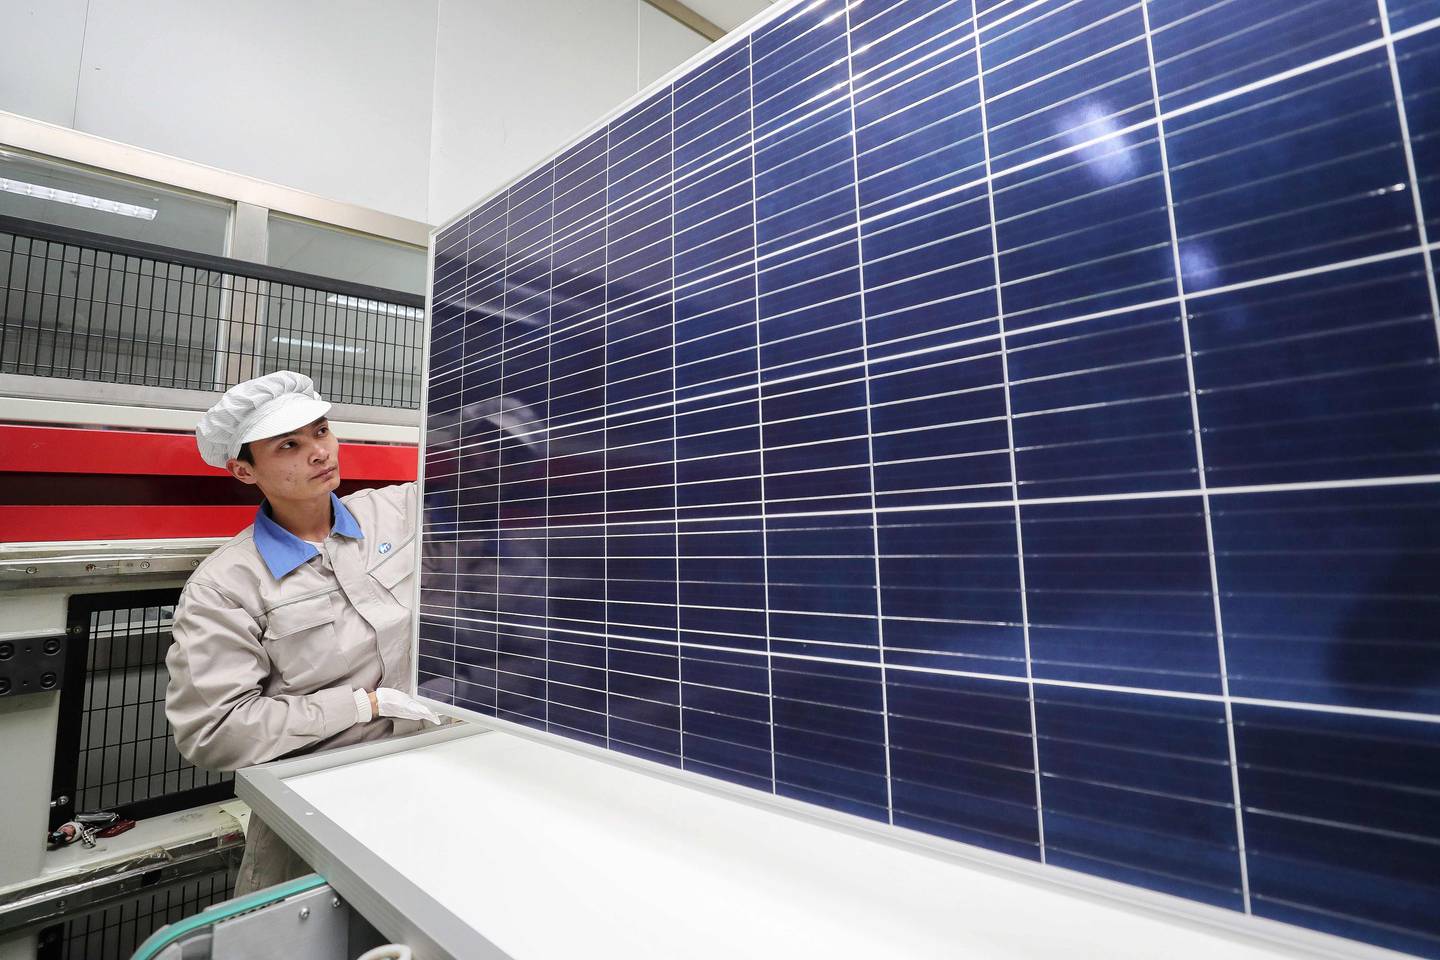 This photo taken on February 27, 2019 shows a worker checking newly-made solar panels at a factory in Lianyungang in China's eastern Jiangsu province. - China's manufacturing activity shrunk for a third straight month in February, sinking to its worst performance in three years as the economy slows and the US trade war bites, official data showed on February 28. (Photo by STR / AFP) / China OUT